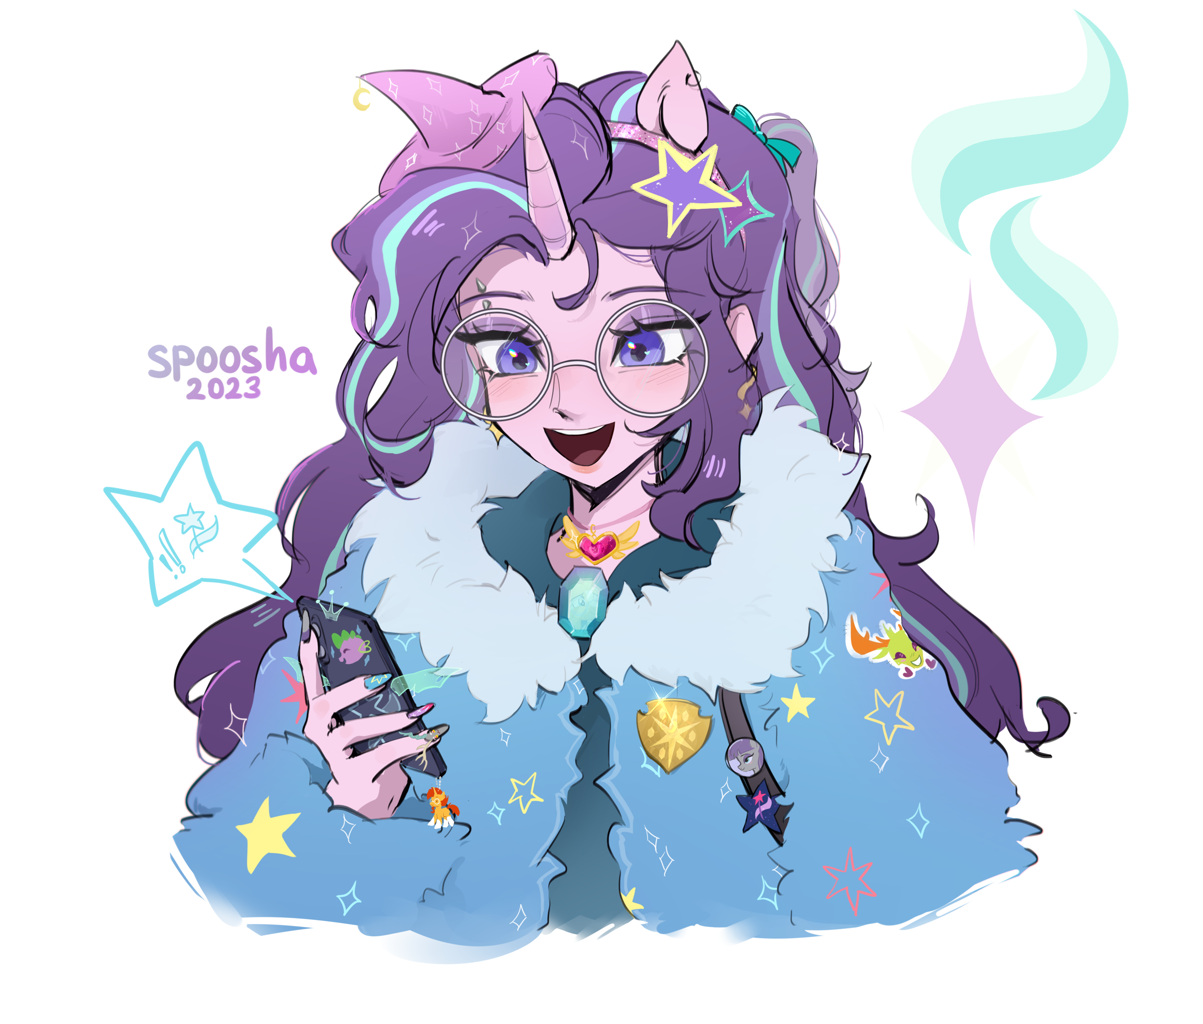 [amulet,blushing,bow,changeling,child,clothes,crown,cute,cutie mark,detailed,dialogue,diamond,discord,earring,equestria girls,fur,gem,glasses,goggles,hat,heart,heart eyes,horn,horned humanization,human,humanized,implied spike,implied trixie,jacket,jewelry,message,nails,open mouth,outfit,outfits,pendant,piercing,ponytail,queen chrysalis,redesign,reflection,reflections,safe,schoolgirl,simple background,spike,spoiler:comic,stars,sunburst,trixie,twilight sparkle,unicorn,white background,wingding eyes,wings,regalia,implied lesbian,hoop,ear piercing,maud pie,cutie mark on clothes,implied twilight sparkle,implied discord,starlight glimmer,smiling,implied maud pie,offscreen character,thorax,implied thorax,offscreen human,celestial advice,spoiler:eqg specials,mirror magic,implied queen chrysalis,hooped earrings,artist:spoosha]